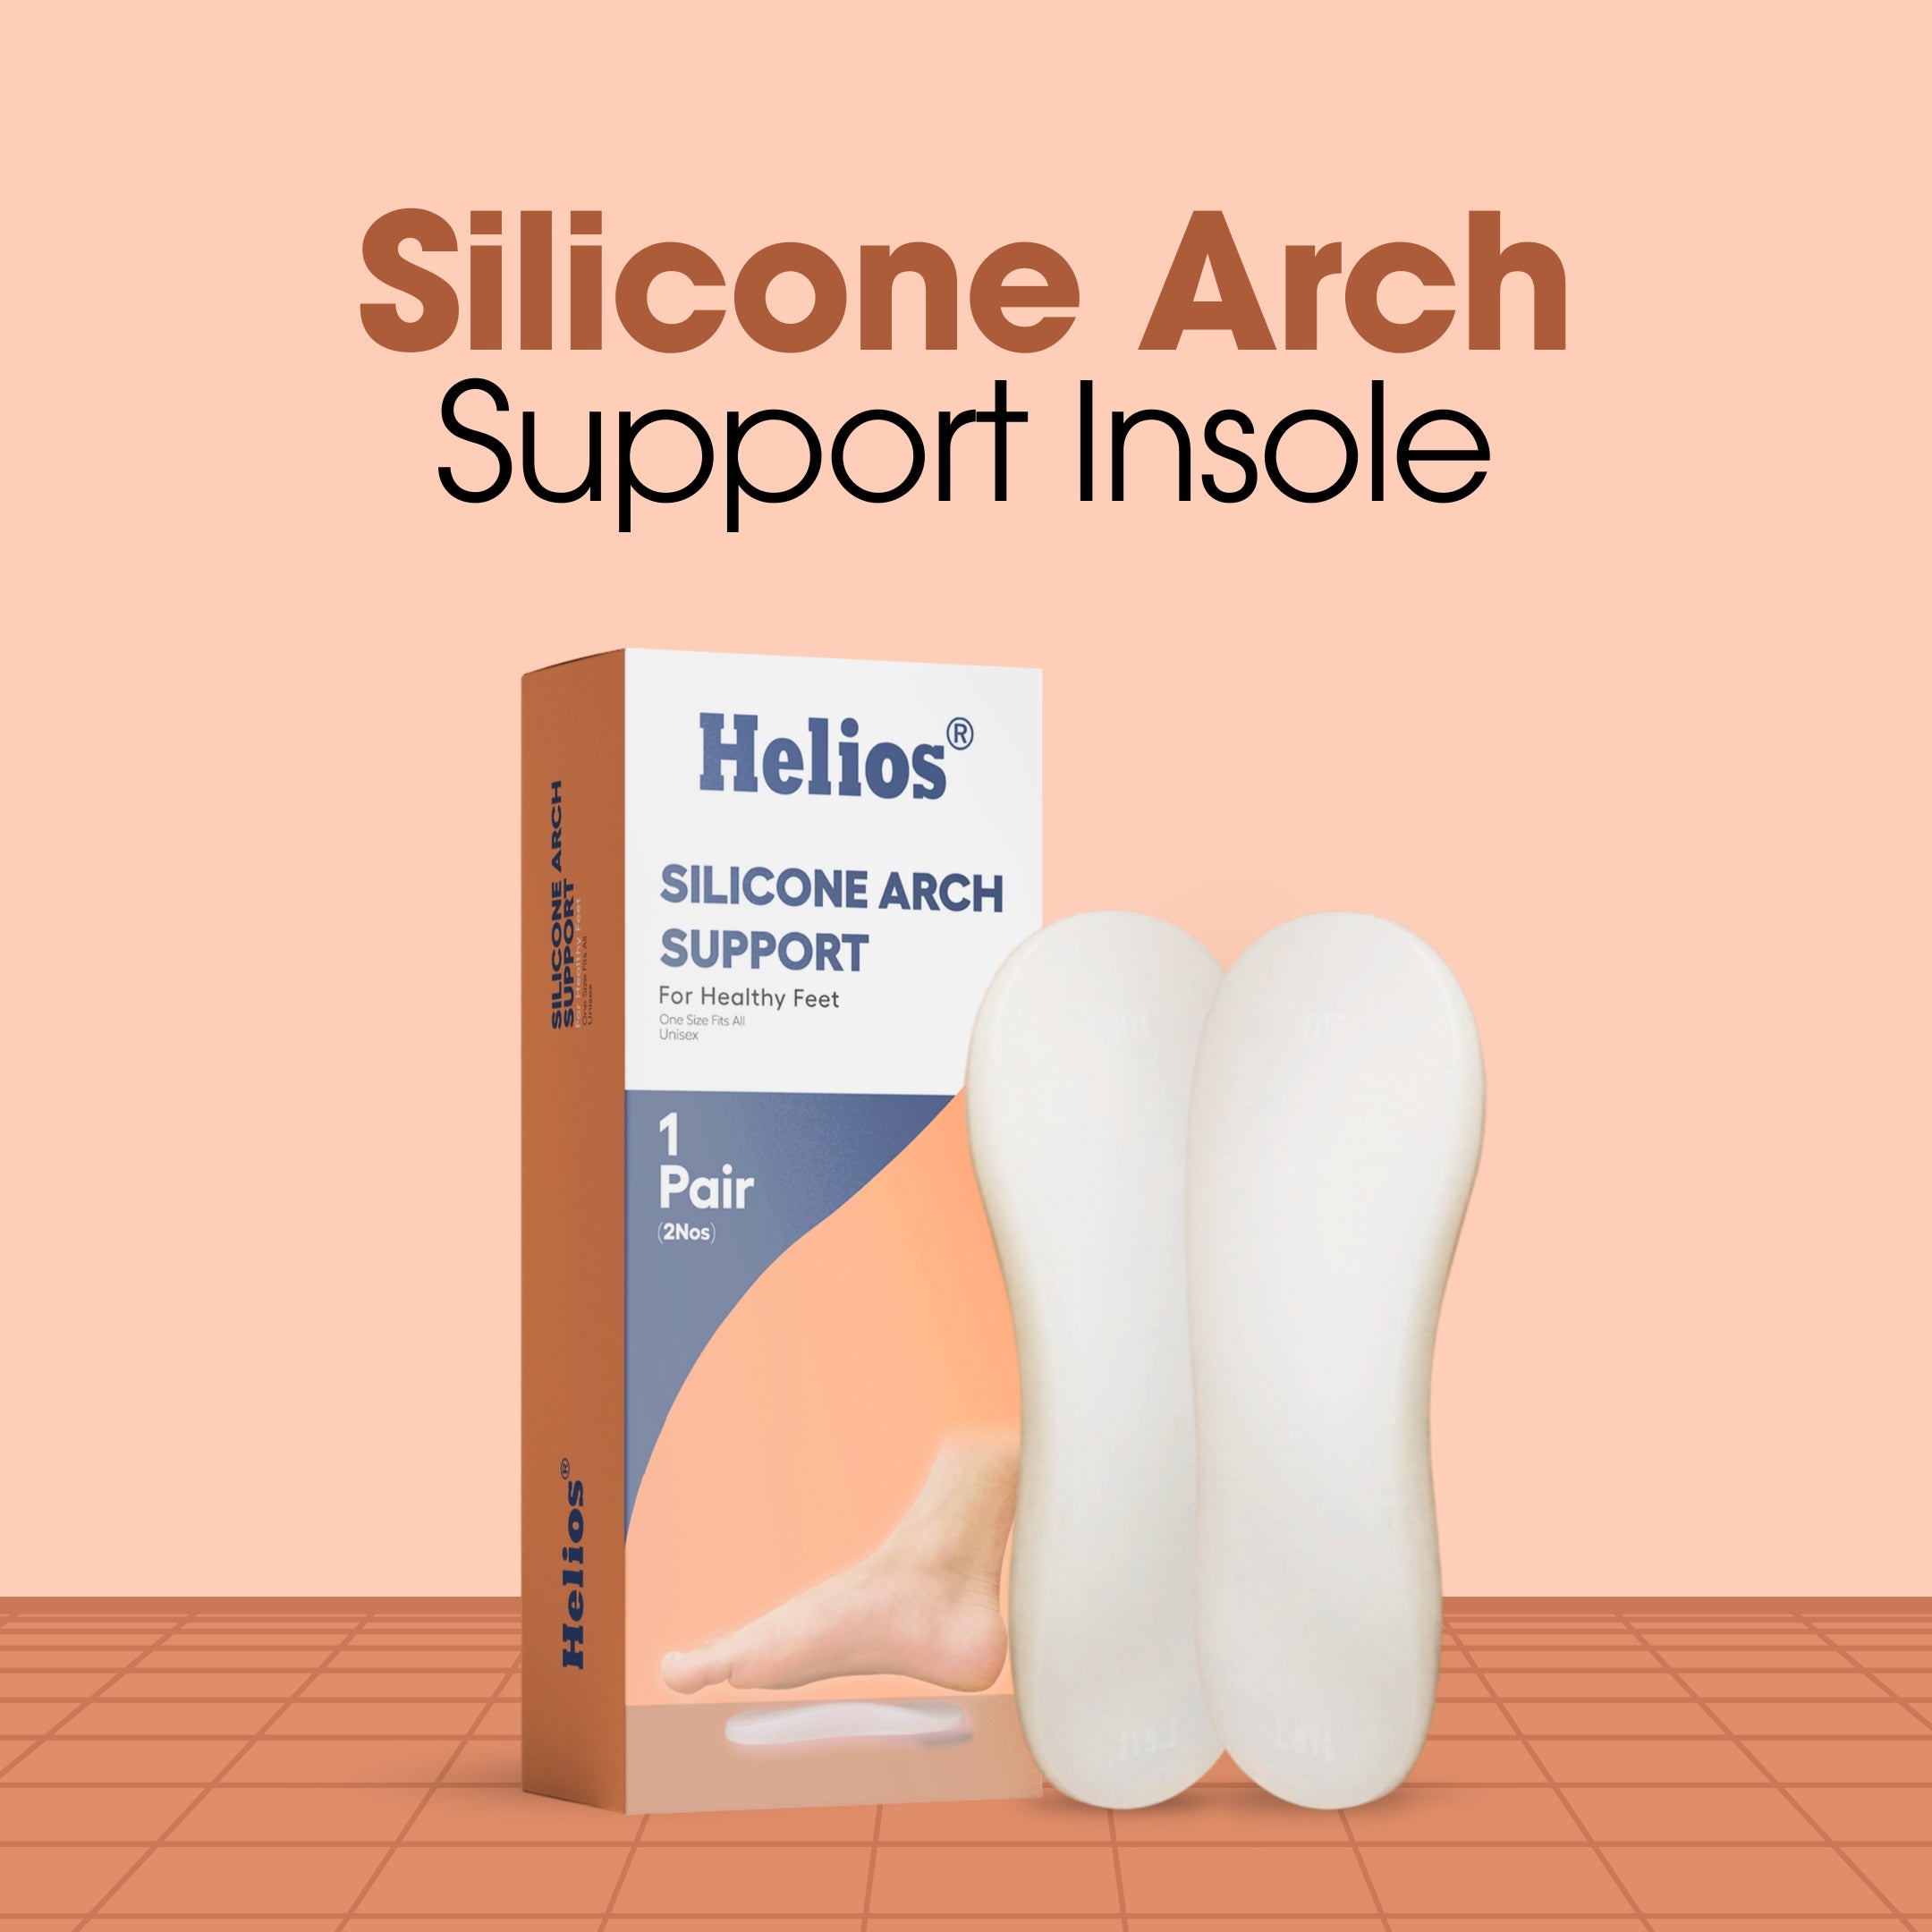 Helios Silicone Arch Support Insole | Unisex | One size fits all